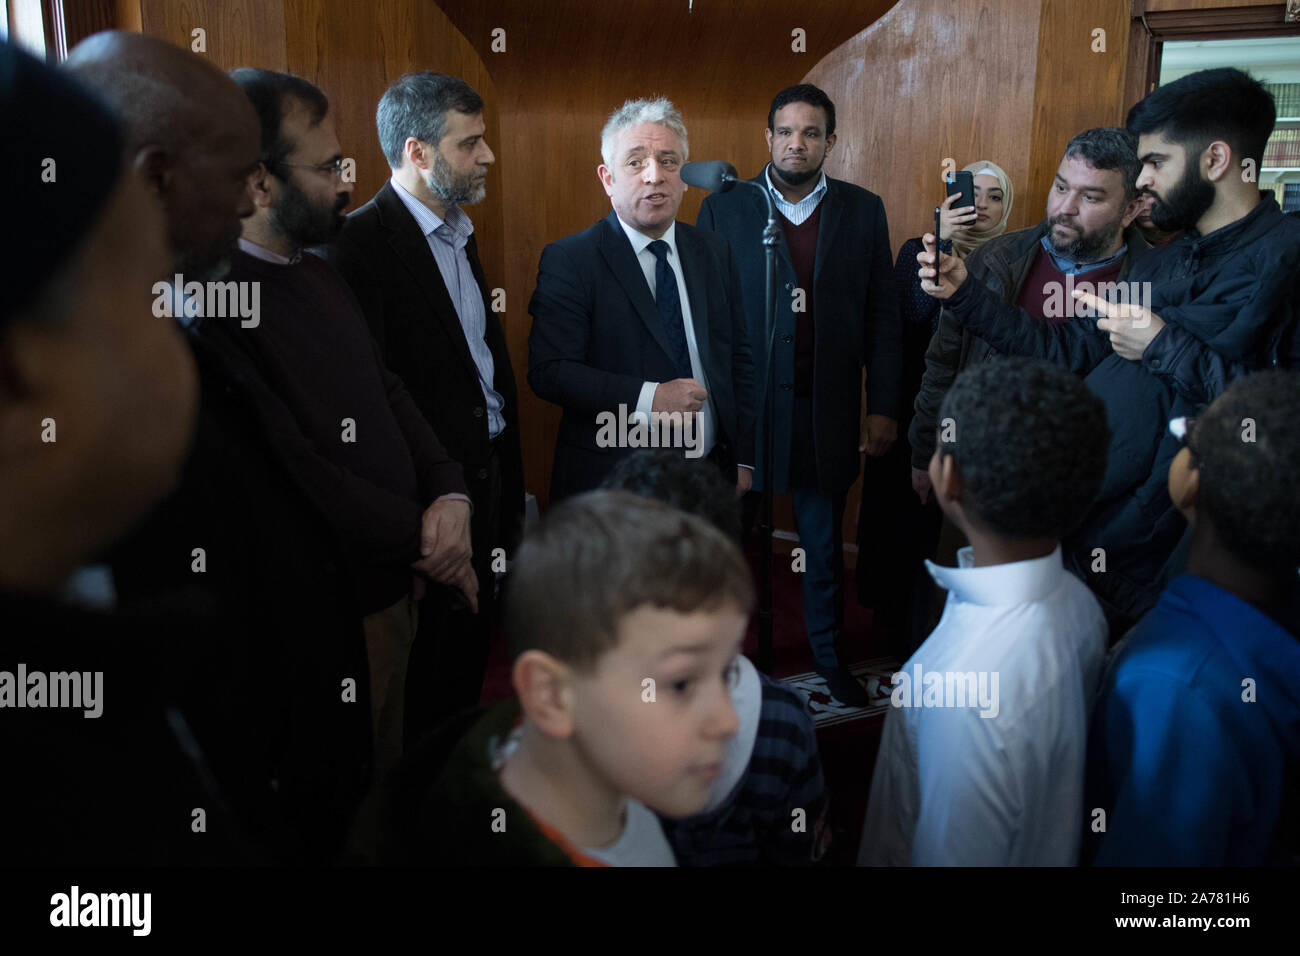 Speaker of the House of Commons, John Bercow meeting worshippers at Finsbury Park Mosque in north London where he leant his support to the Muslim community after an attack on two mosques in New Zealand killing 50 people. The Speaker, who has served ten years in the post intends to stand down before the next election. 17/03/19 Stock Photo